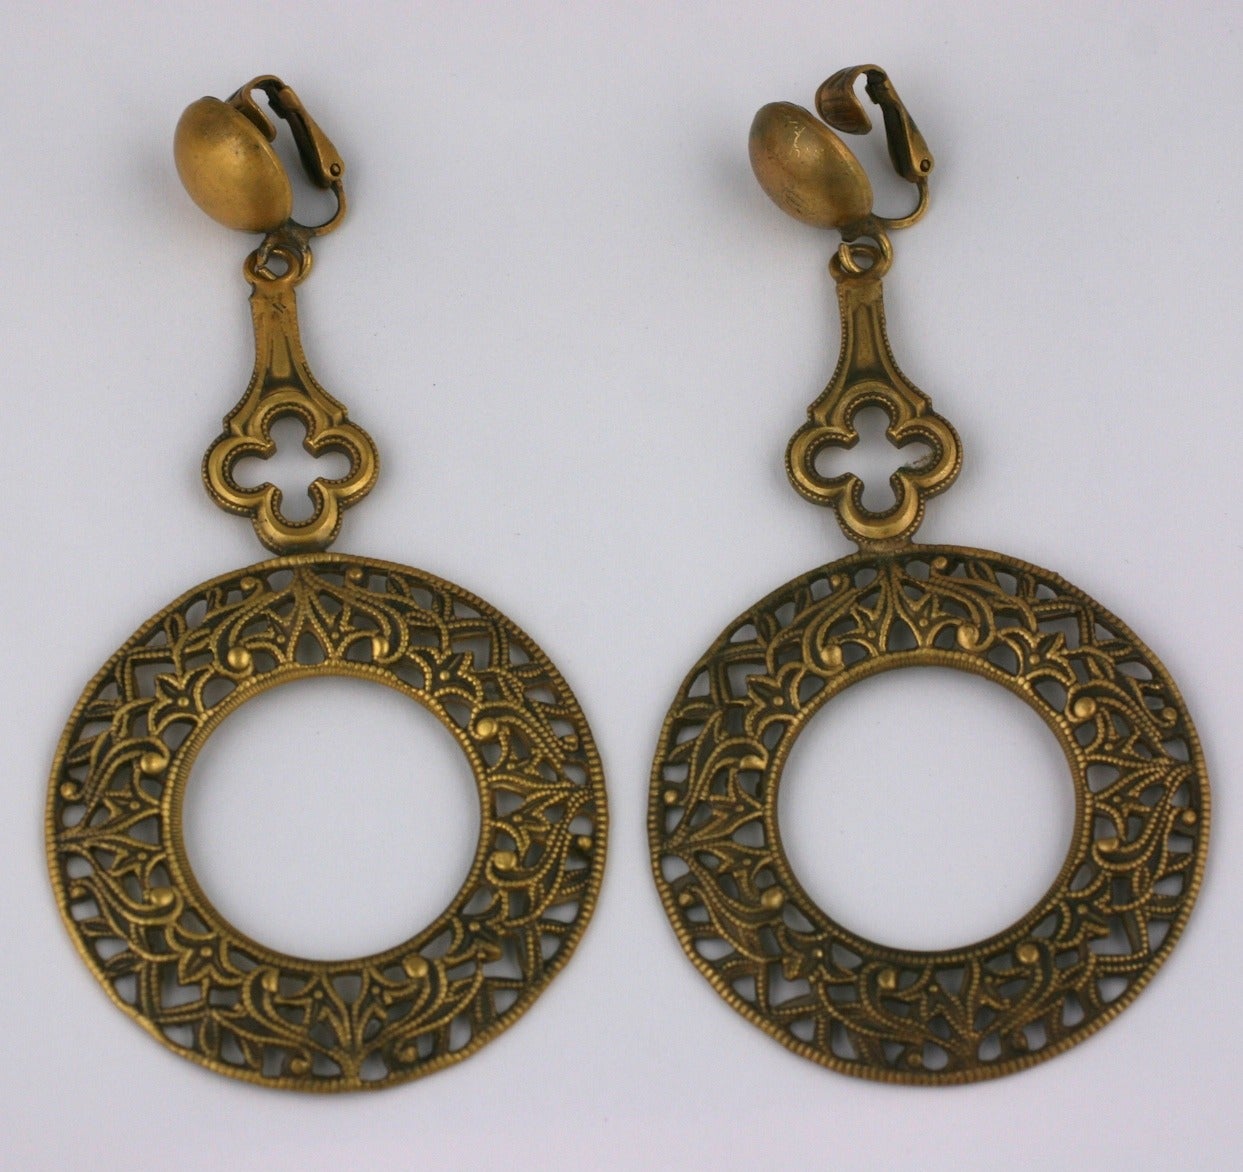 Joseff Hollywood signature lacquered gold, Gothic Revival long hoop earclips. Excellent condition. Length 3.5